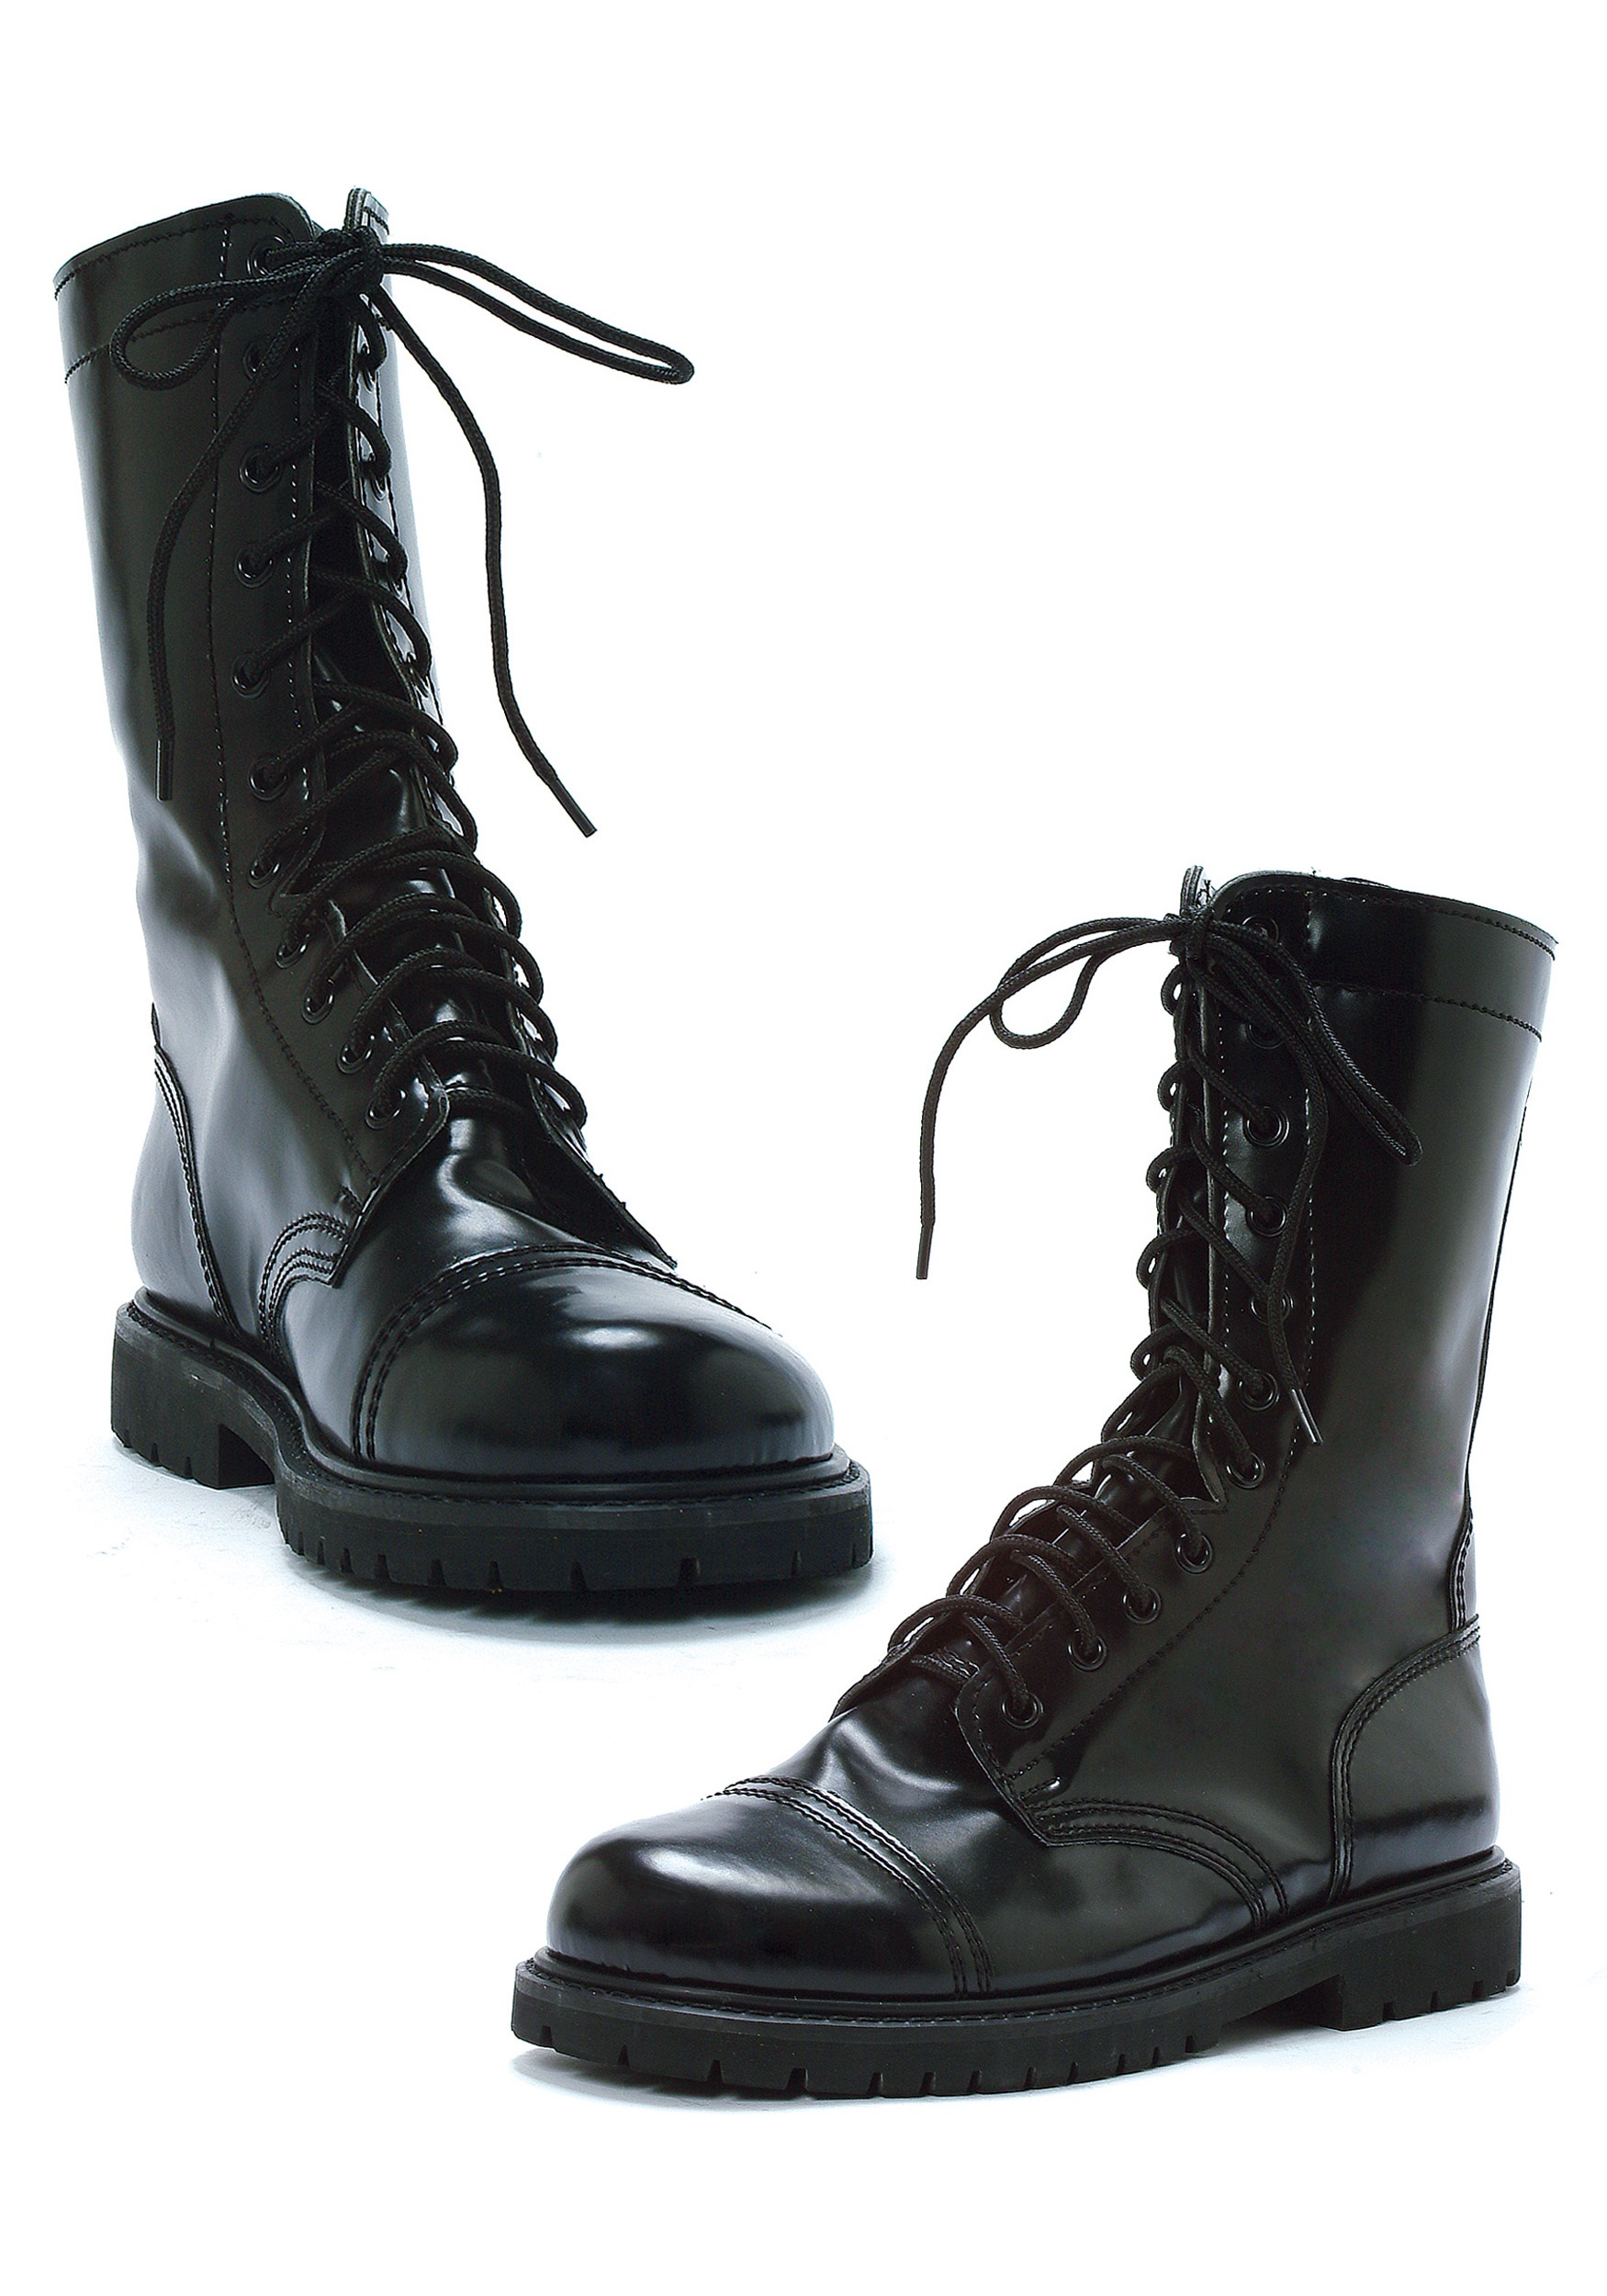 mens military boots